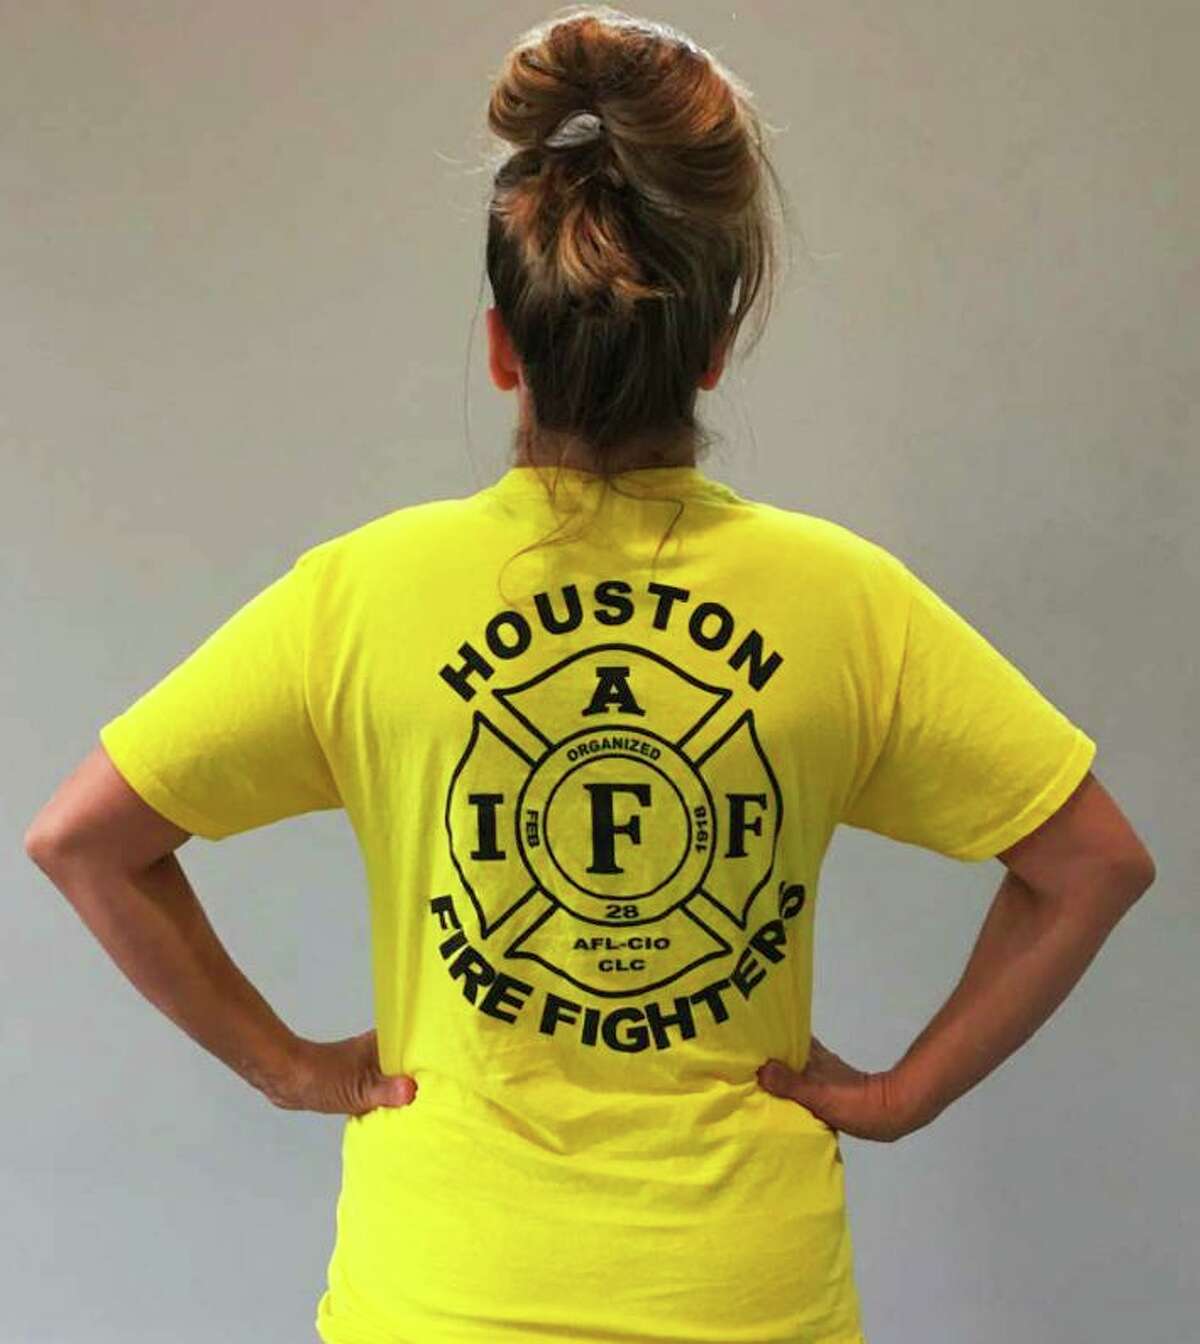 Jillian Ostrewich, who is married to a Houston firefighter, is pictured wearing the T-shirt she wore to a Harris County polling place for early voting in October 2018, when a pay parity measure for firefighters was on the ballot. According to court documents, election officials told her she could not cast her vote with the logo showing, so she turned her T-shirt inside out and was able to proceed.